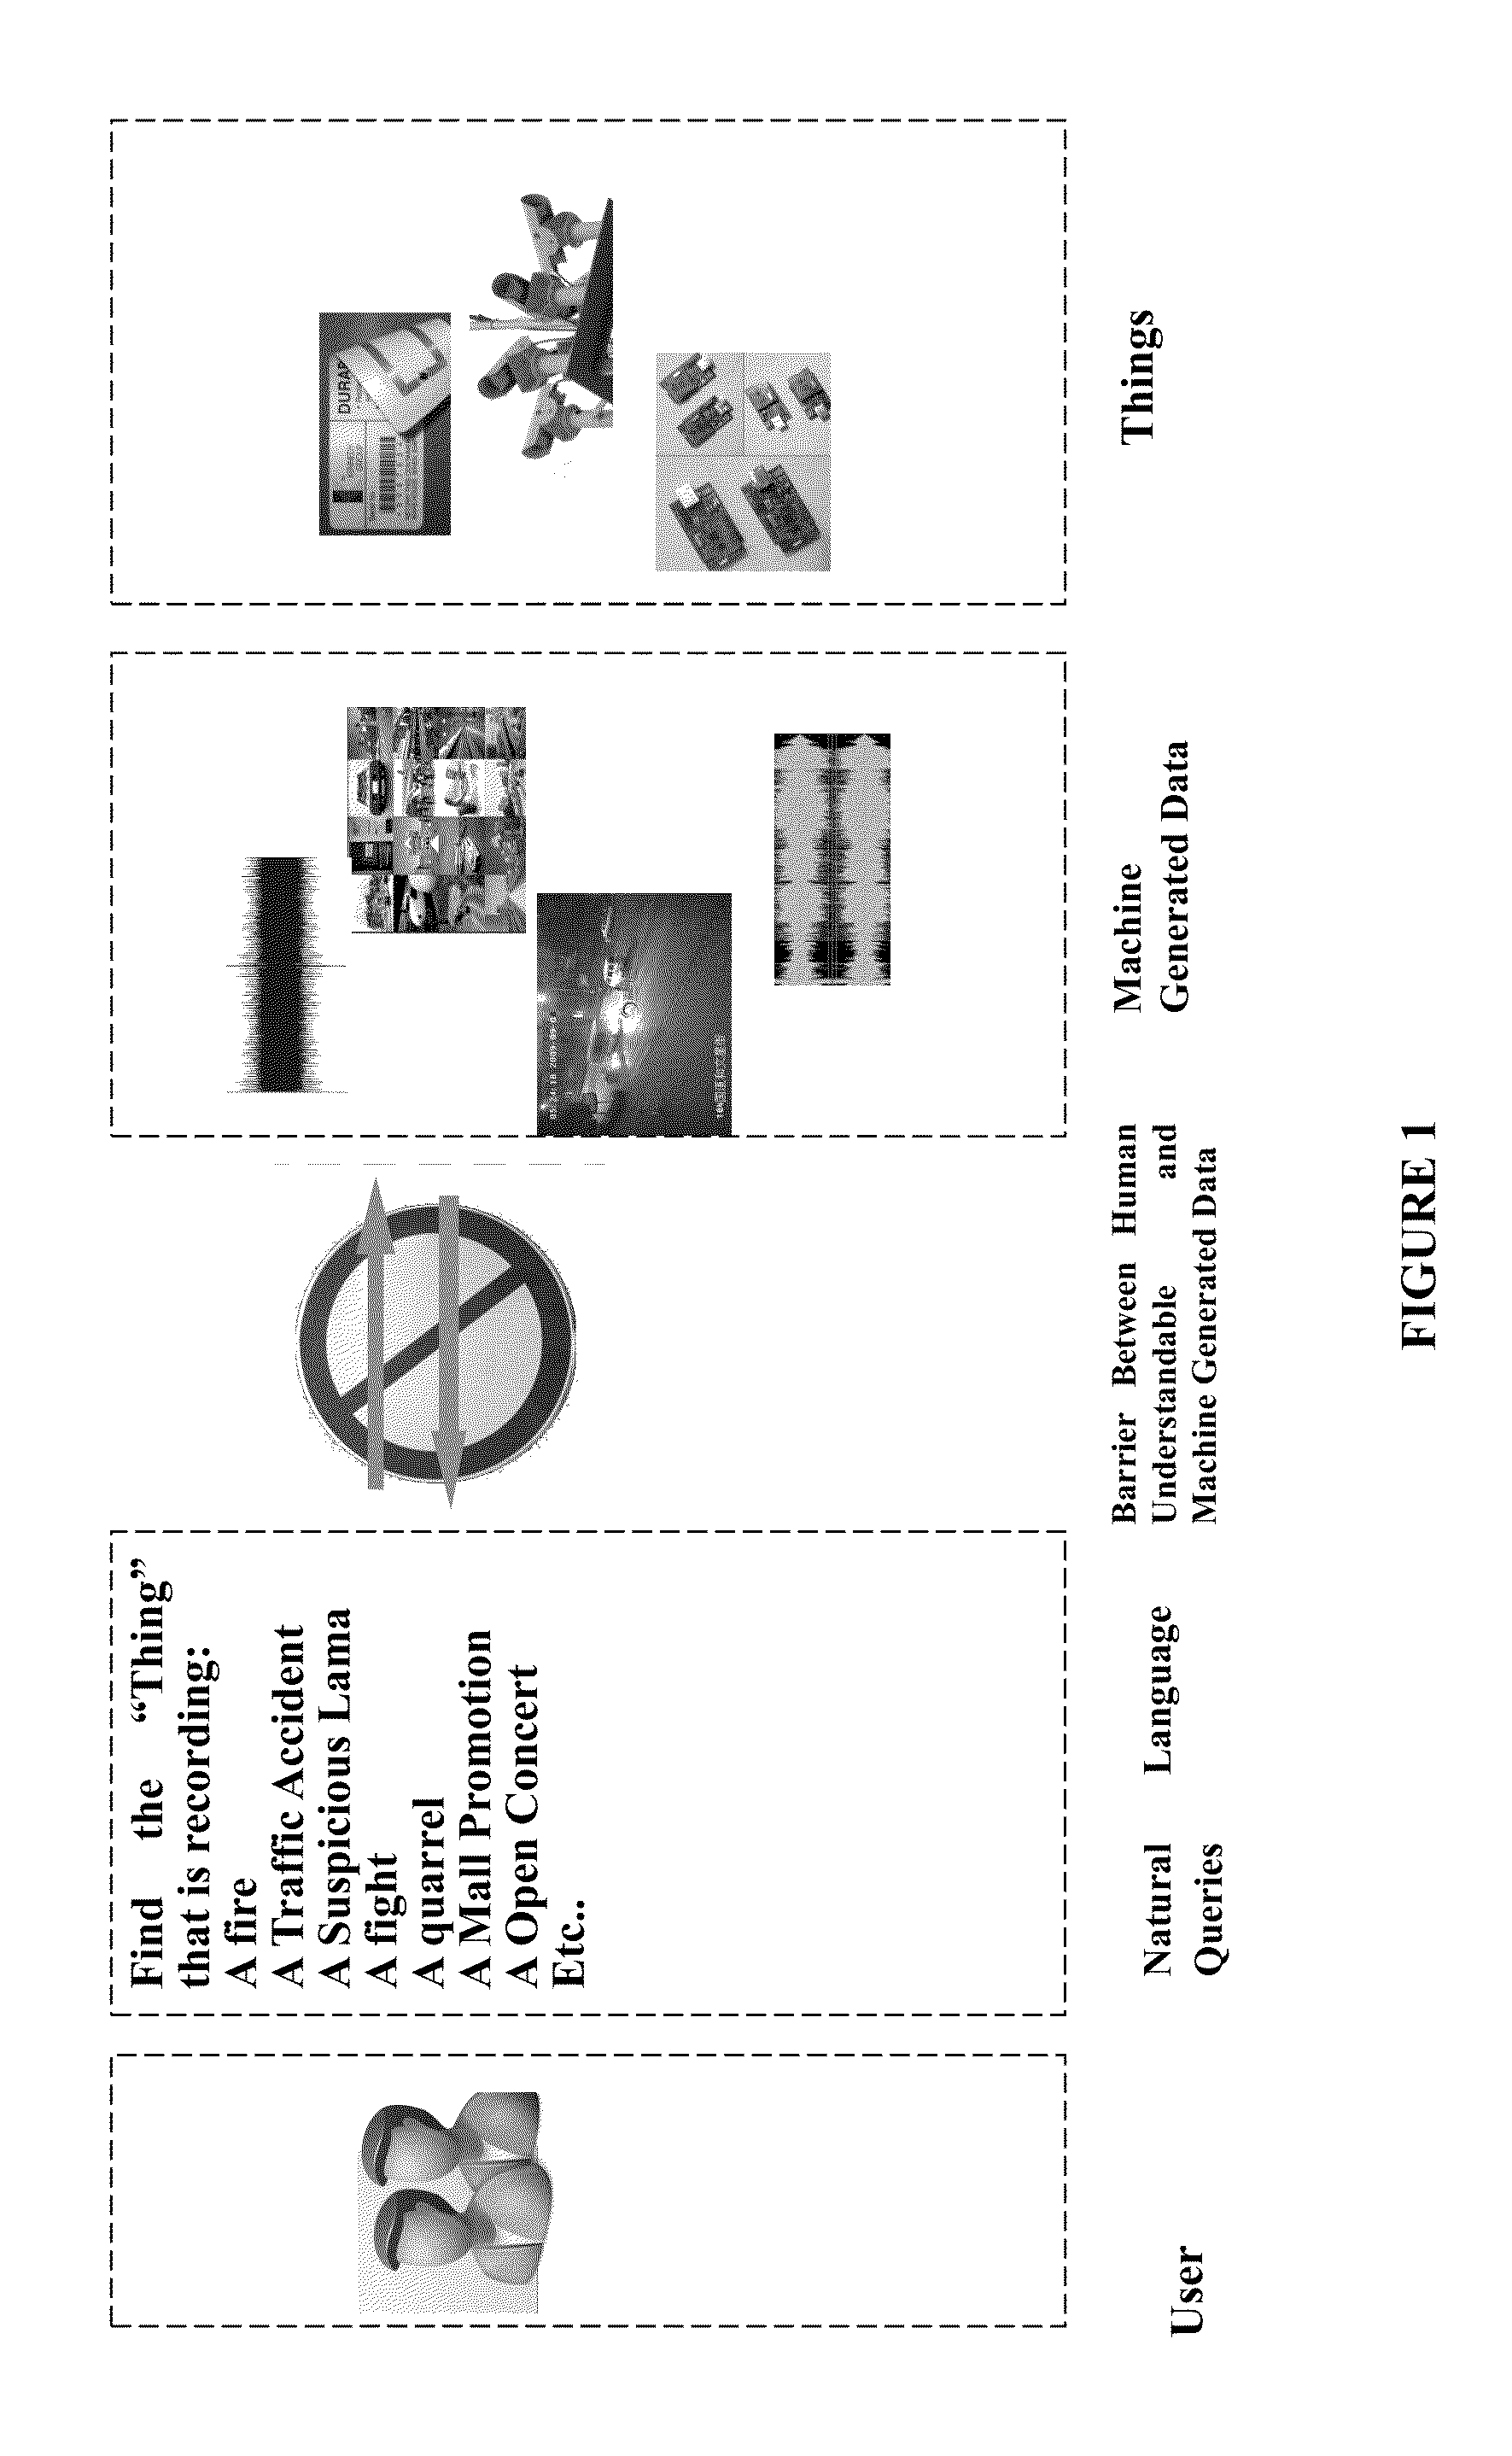 Method and system for tagging original data generated by things in the internet of things